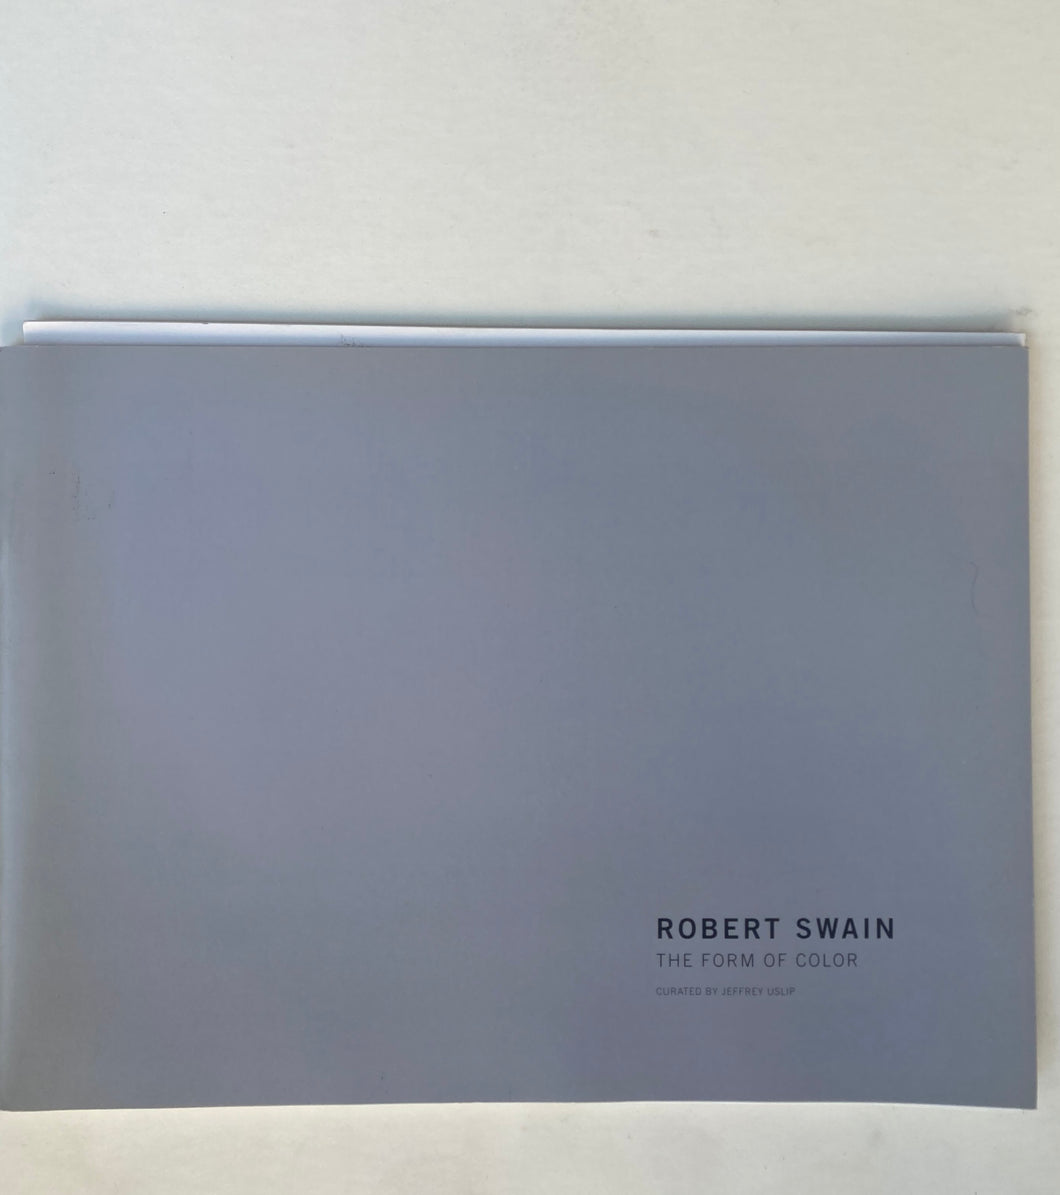 Robert Swain: The Form of Color